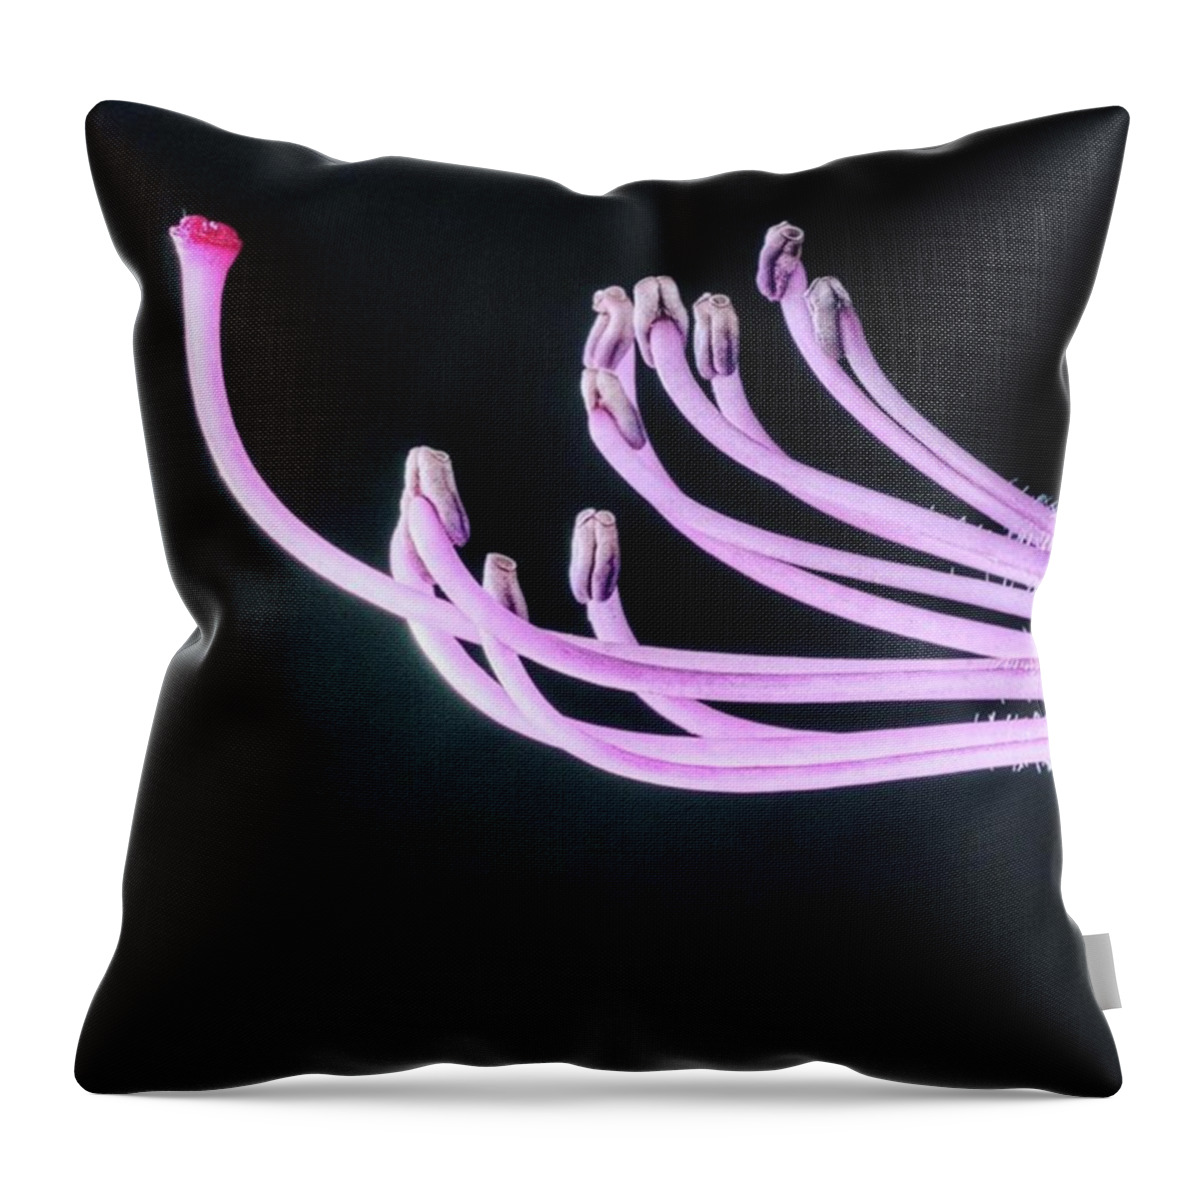 Beautiful Throw Pillow featuring the photograph A Close Up Of The Reproductive Parts Of by John Edwards